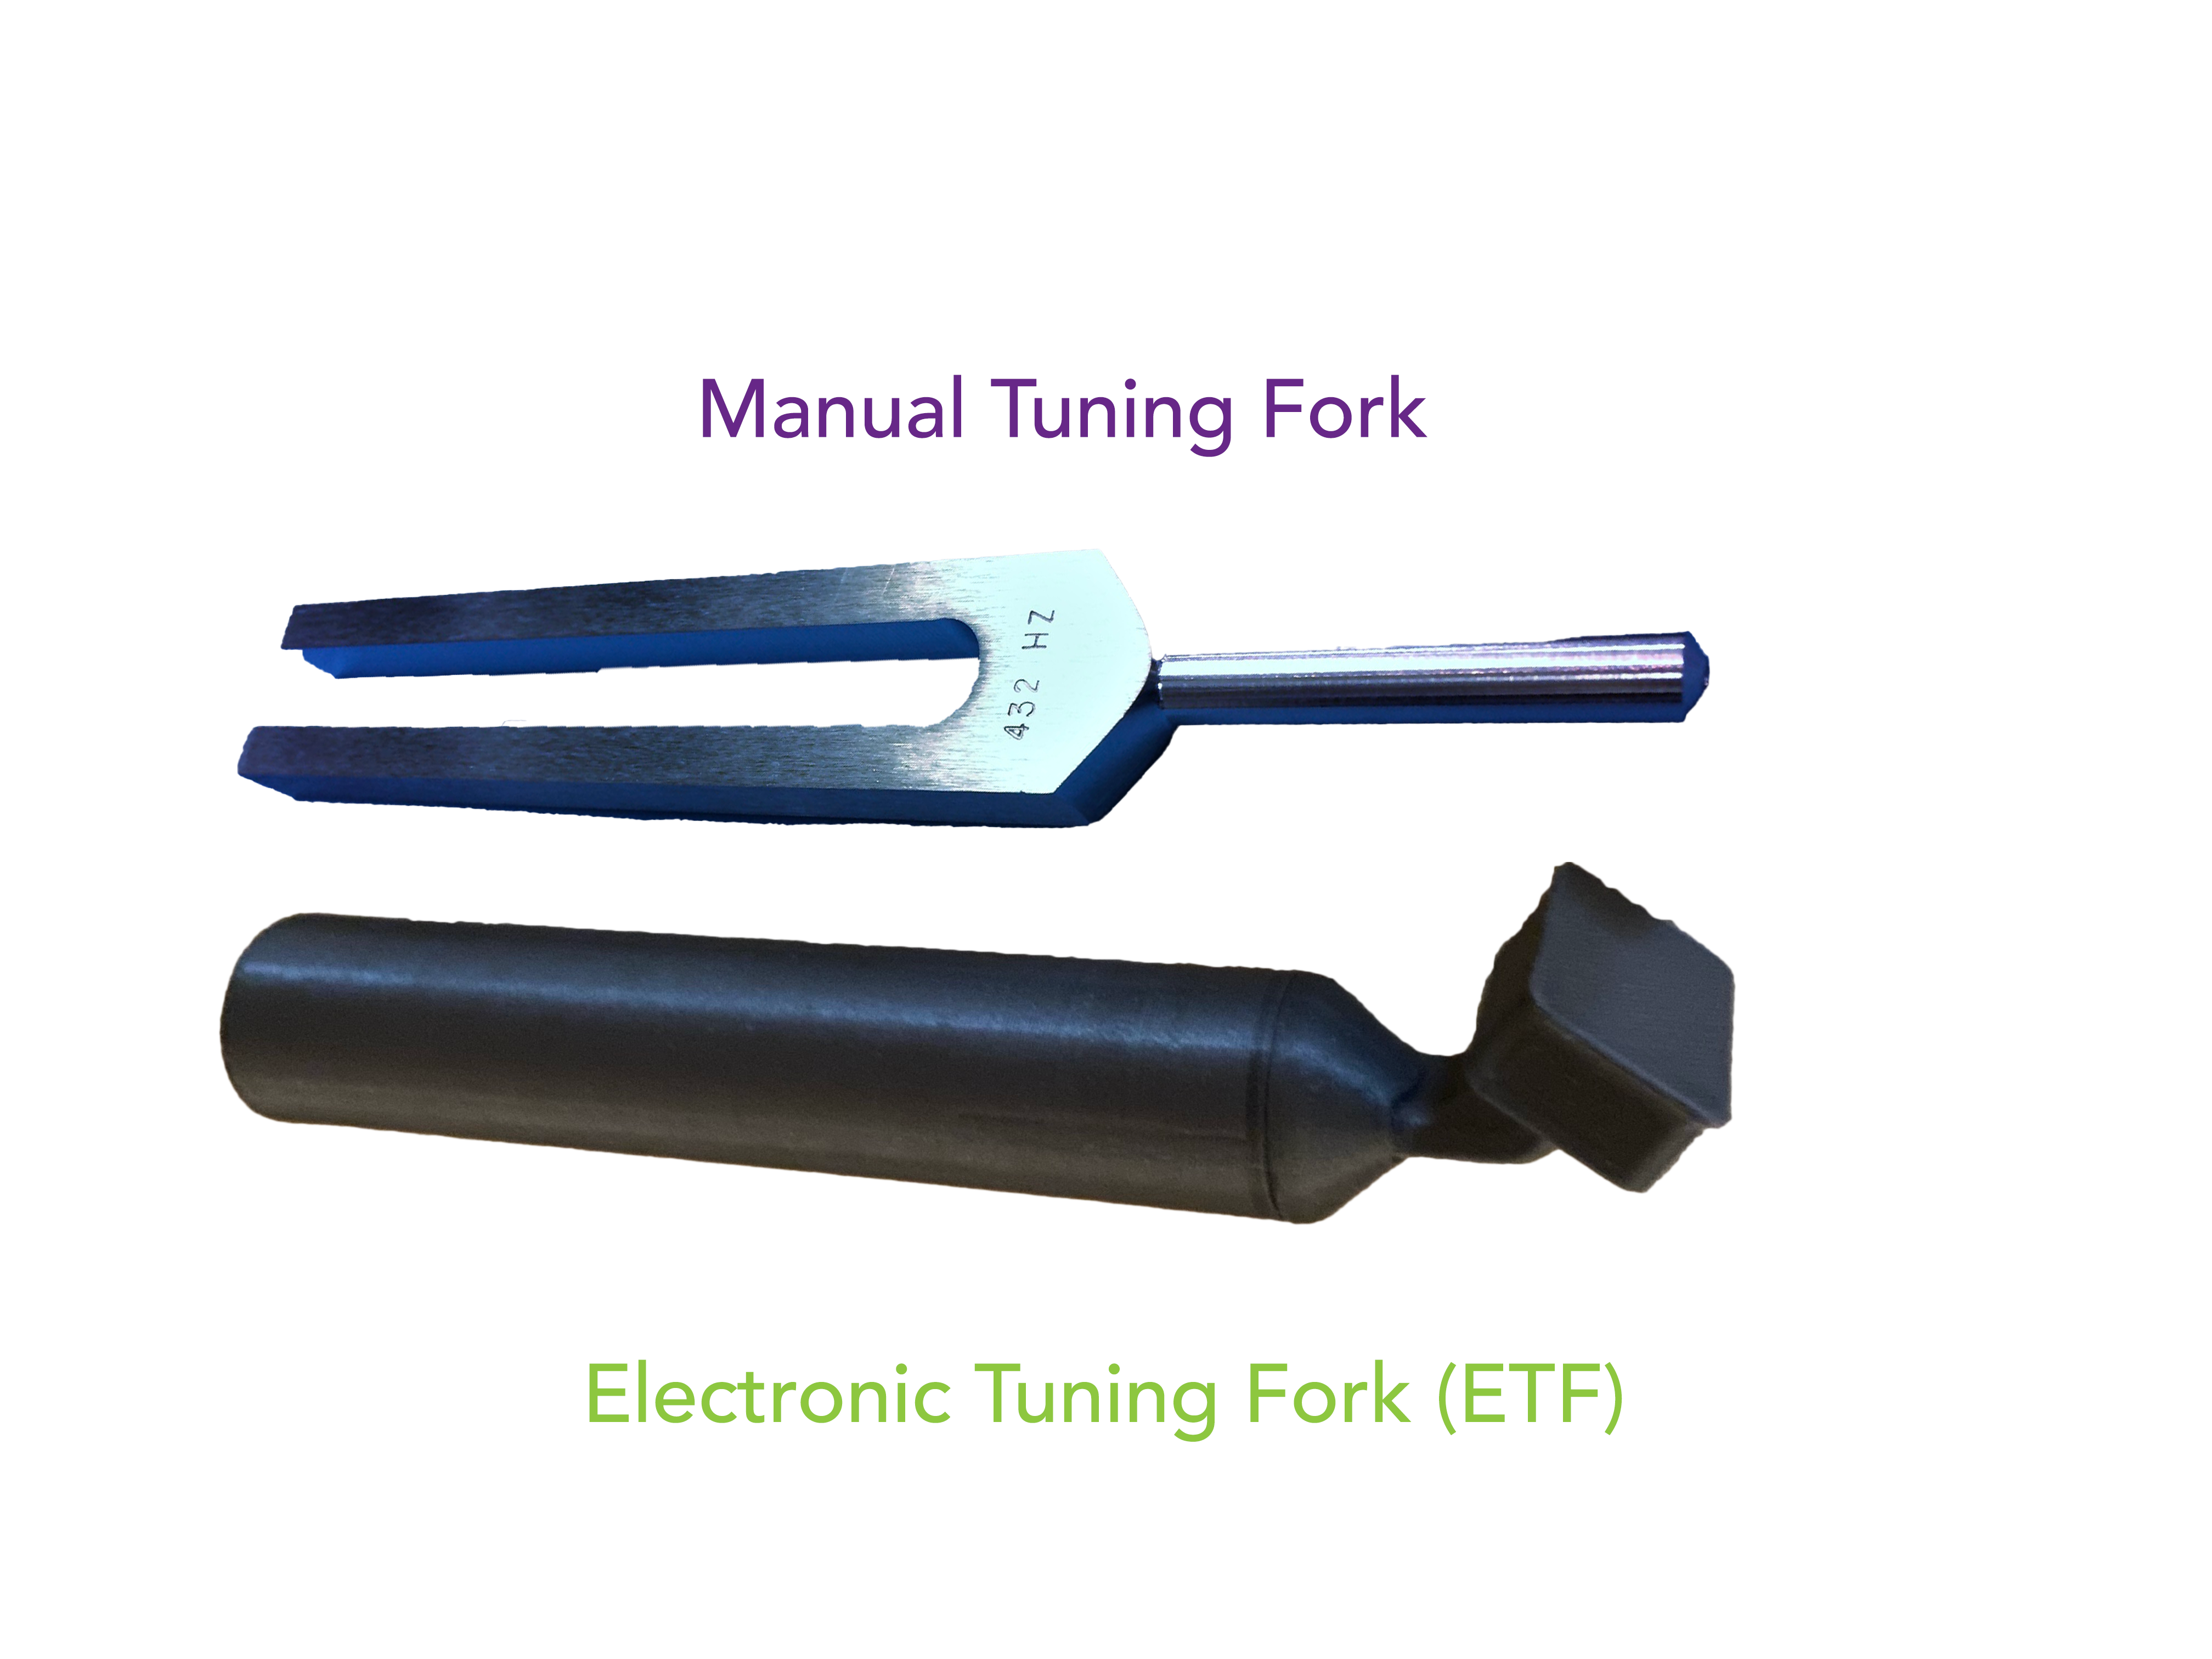 ETF and manual tuning fork